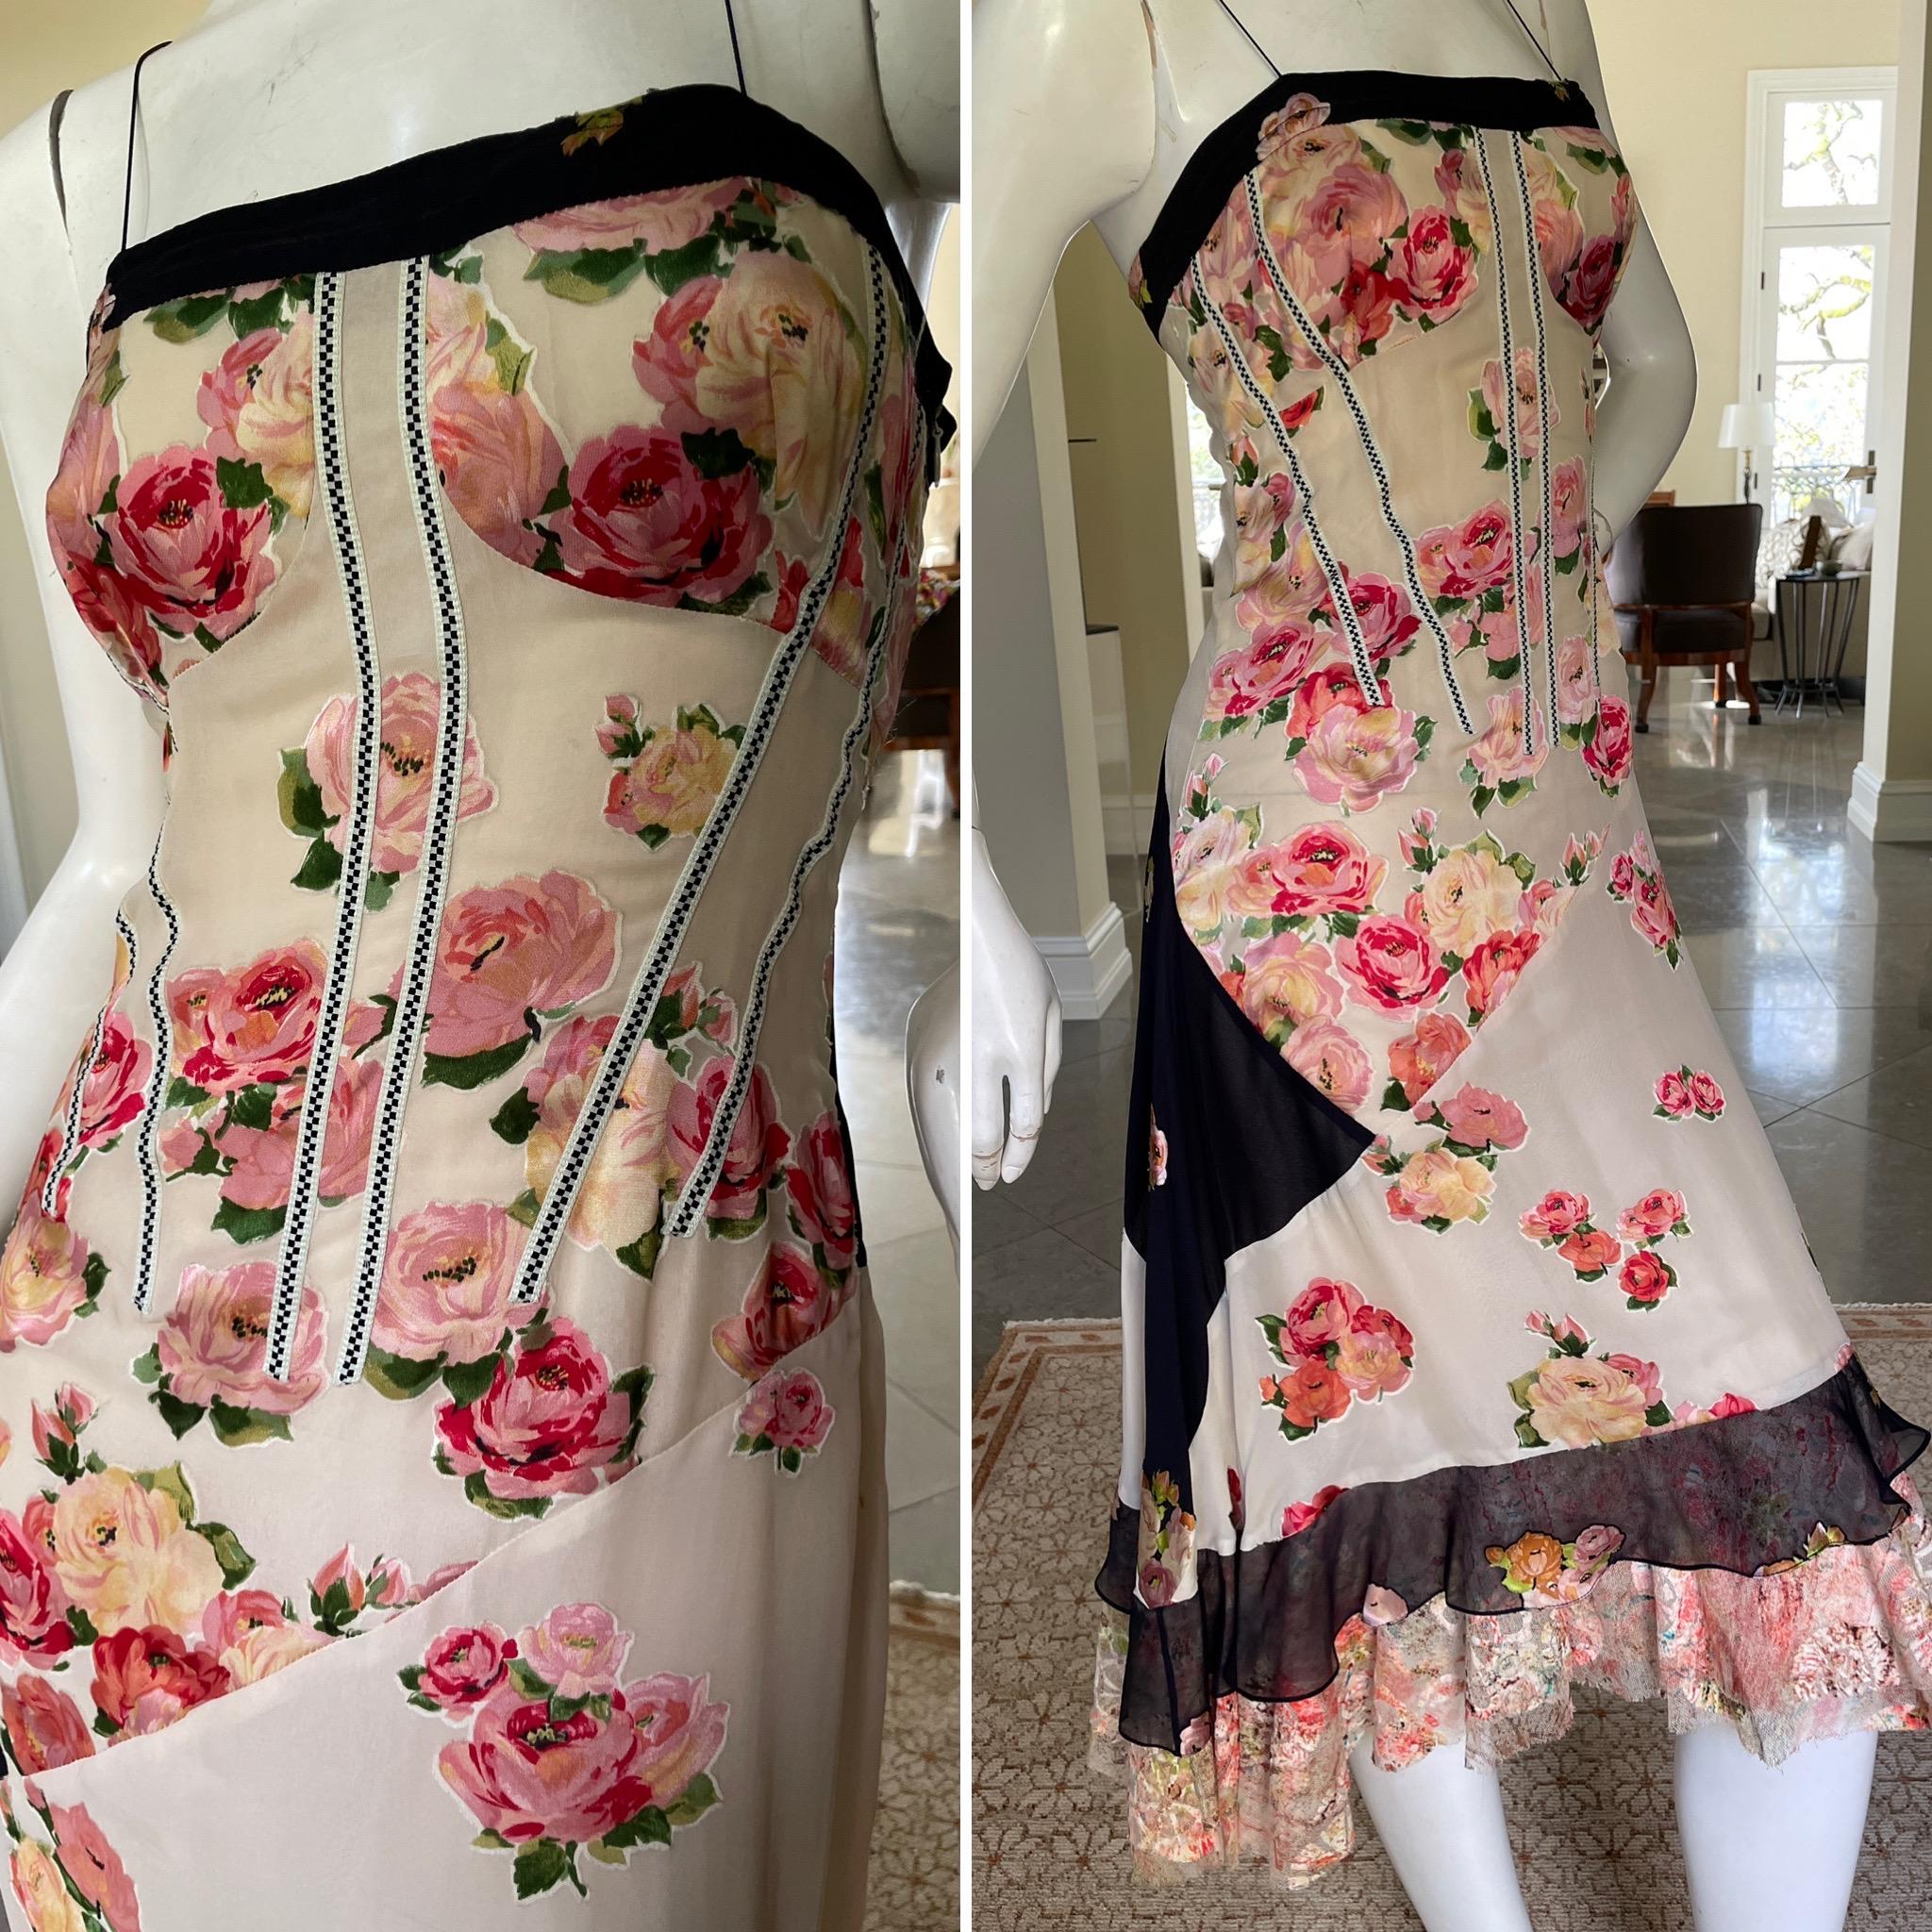 Christian Lacroix Vintage Silk Cocktail Dress with Corset Inspired Details
This is so pretty, so very Lacroix .
Size 38-40 (no size tag)
Bust 34